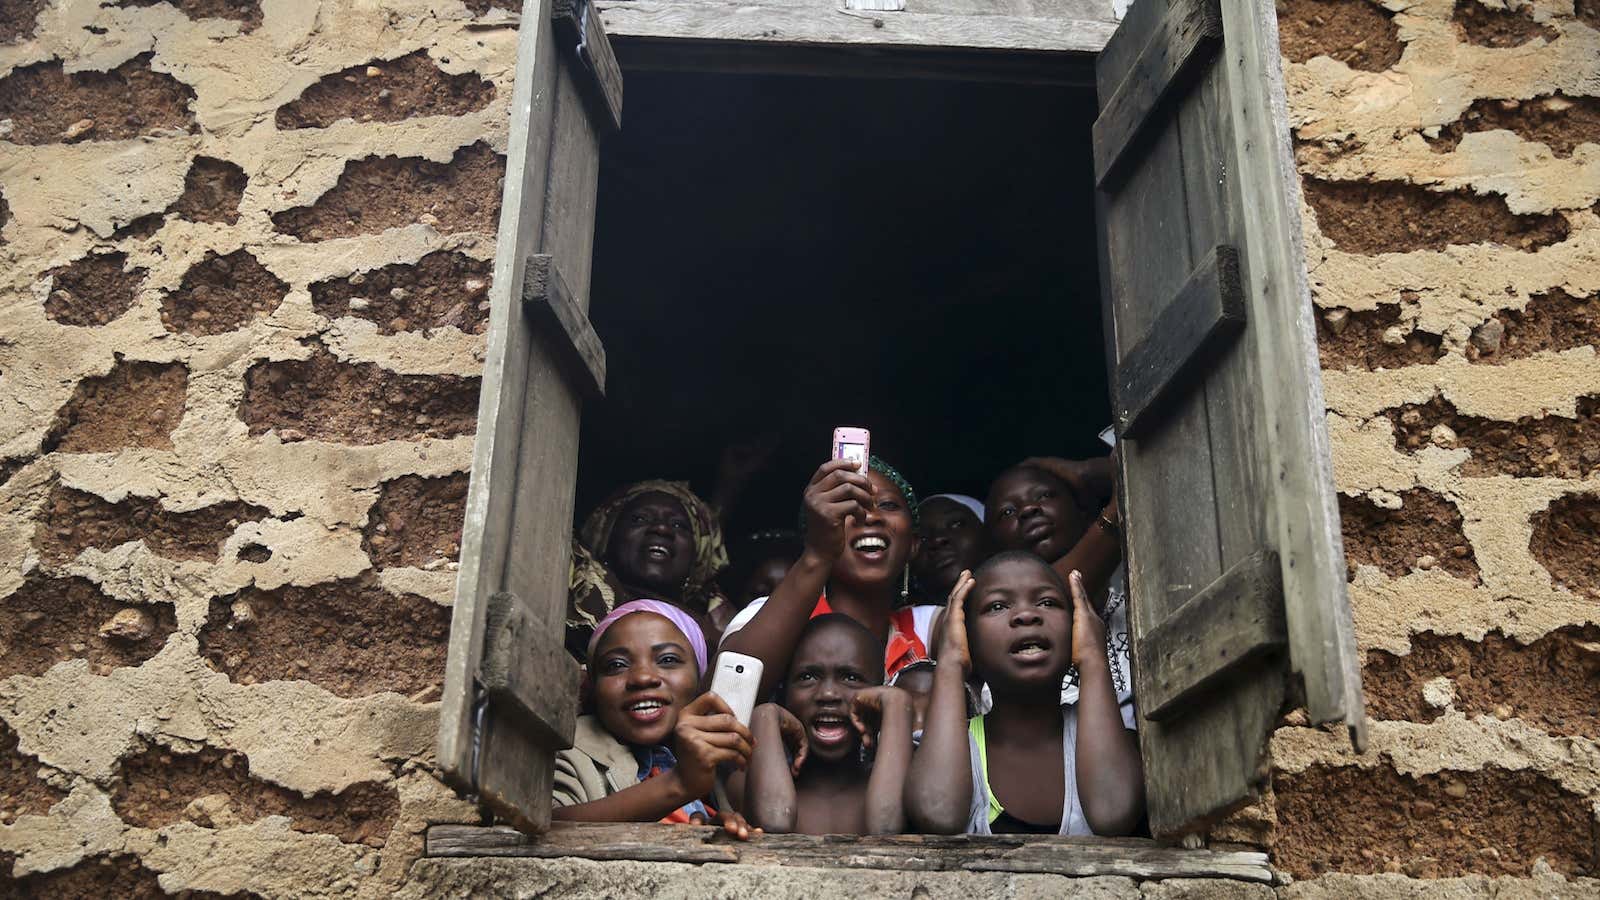 African consumers need cheap, energy-efficient phones specially designed for daily needs.